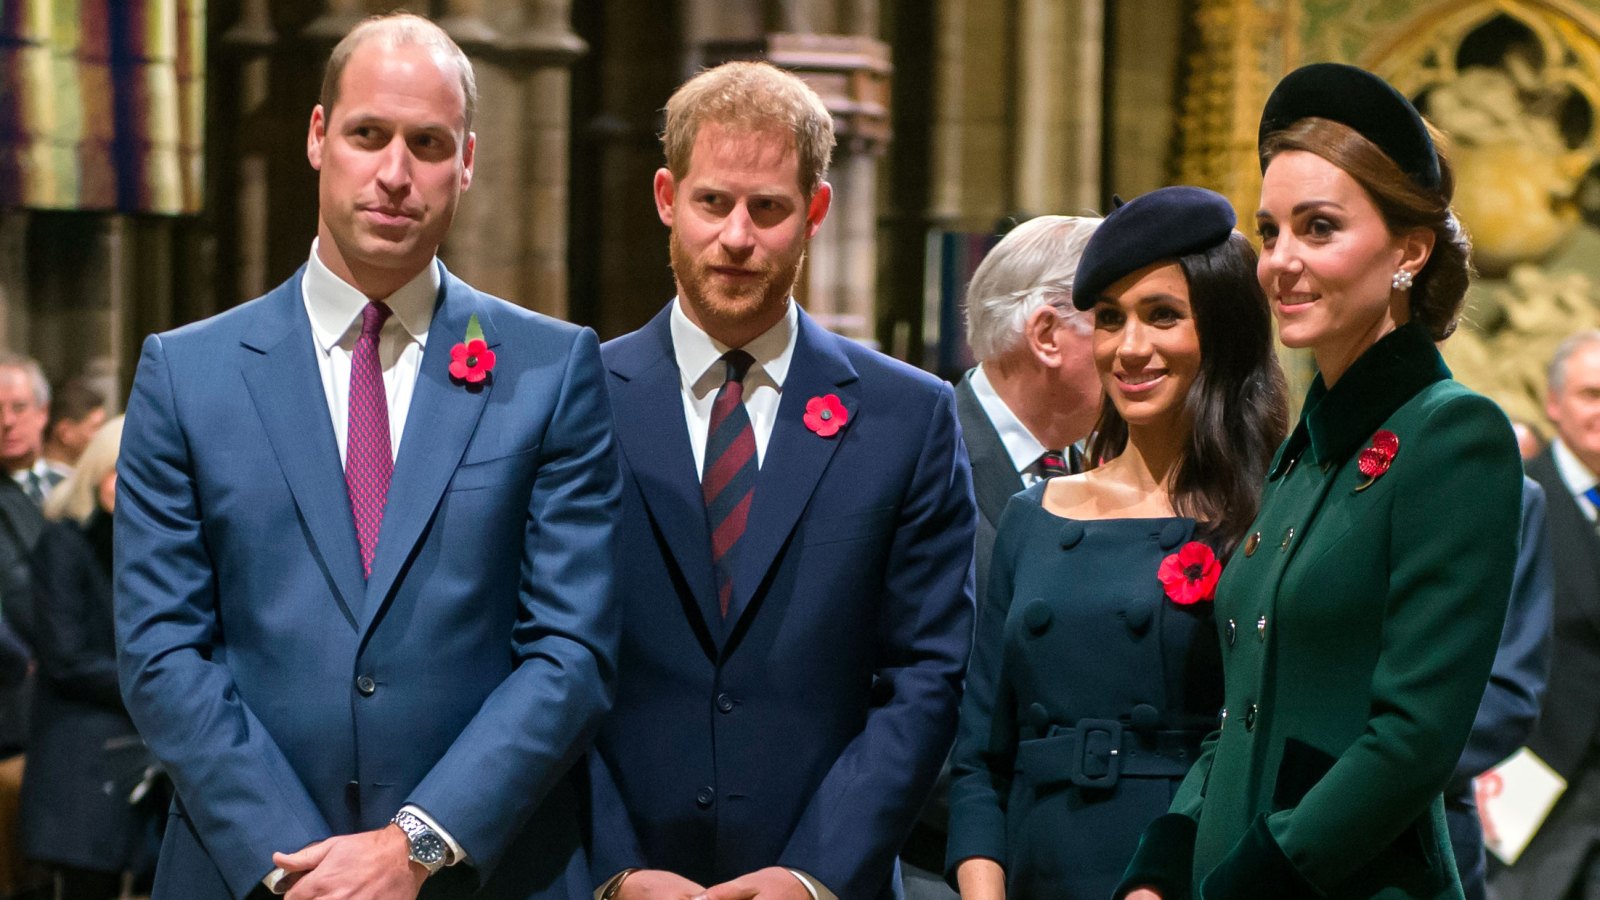 Prince Harry and Prince William Are Set to Divide Household